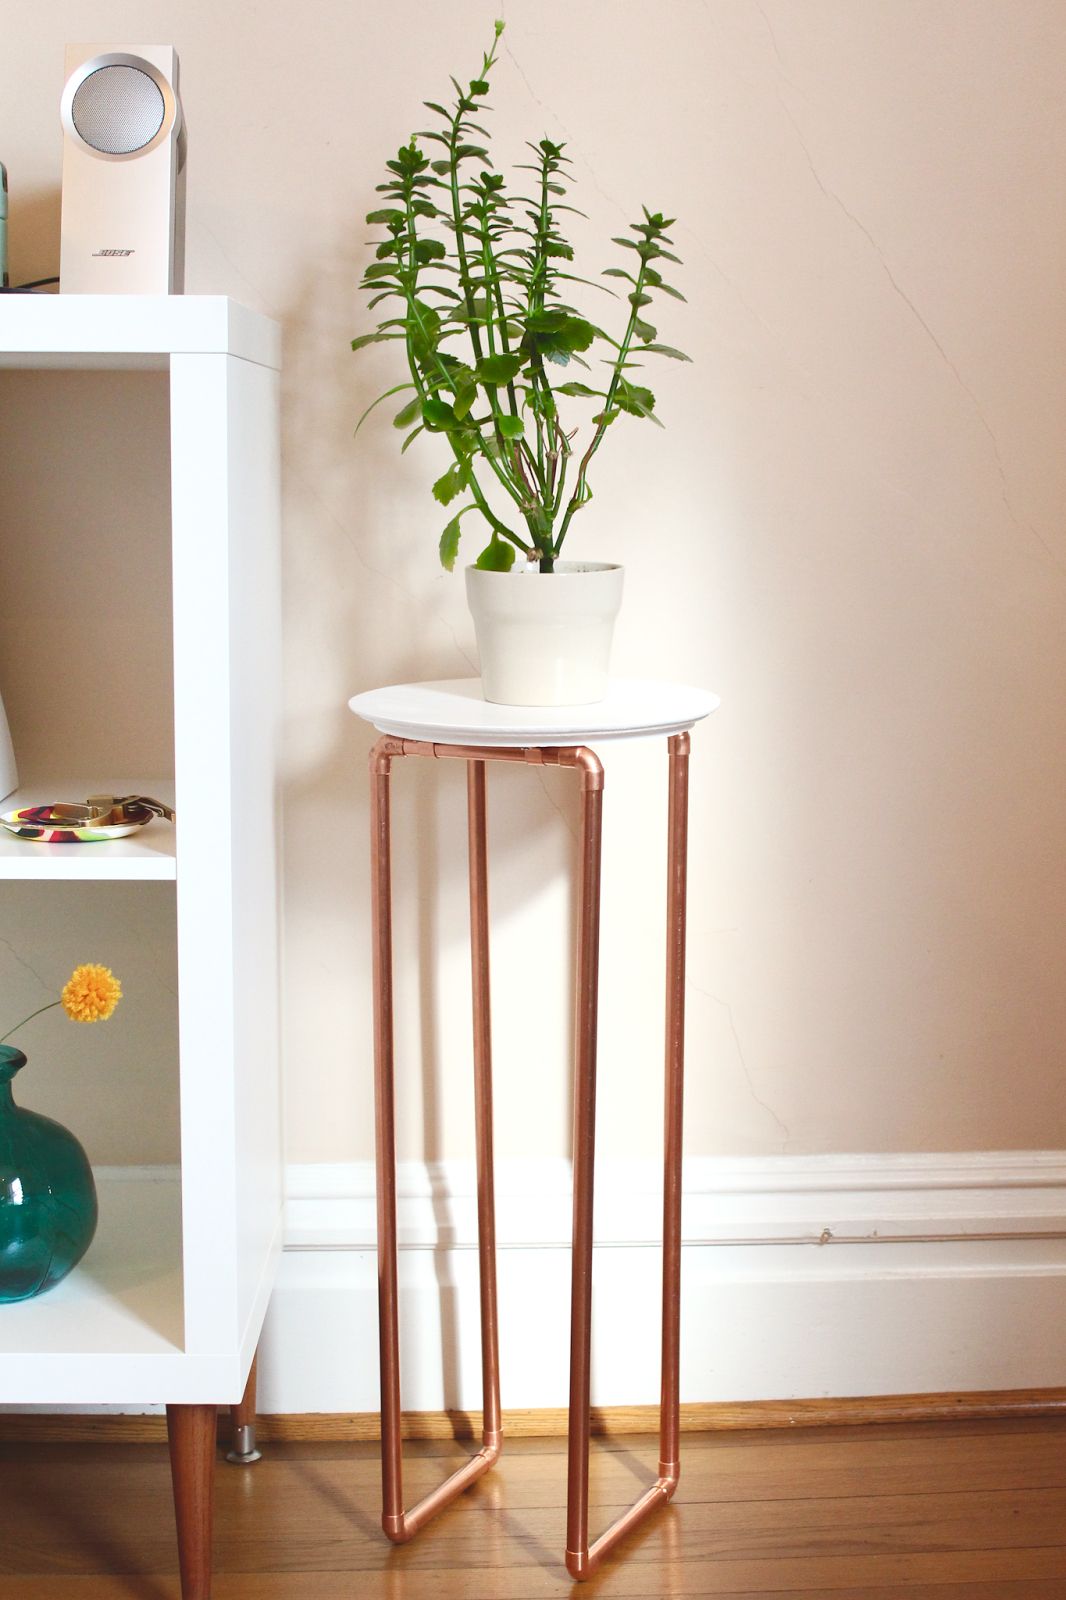 Copper Leg Plant Stand | Sarah & Nick Intended For Copper Plant Stands (View 6 of 15)